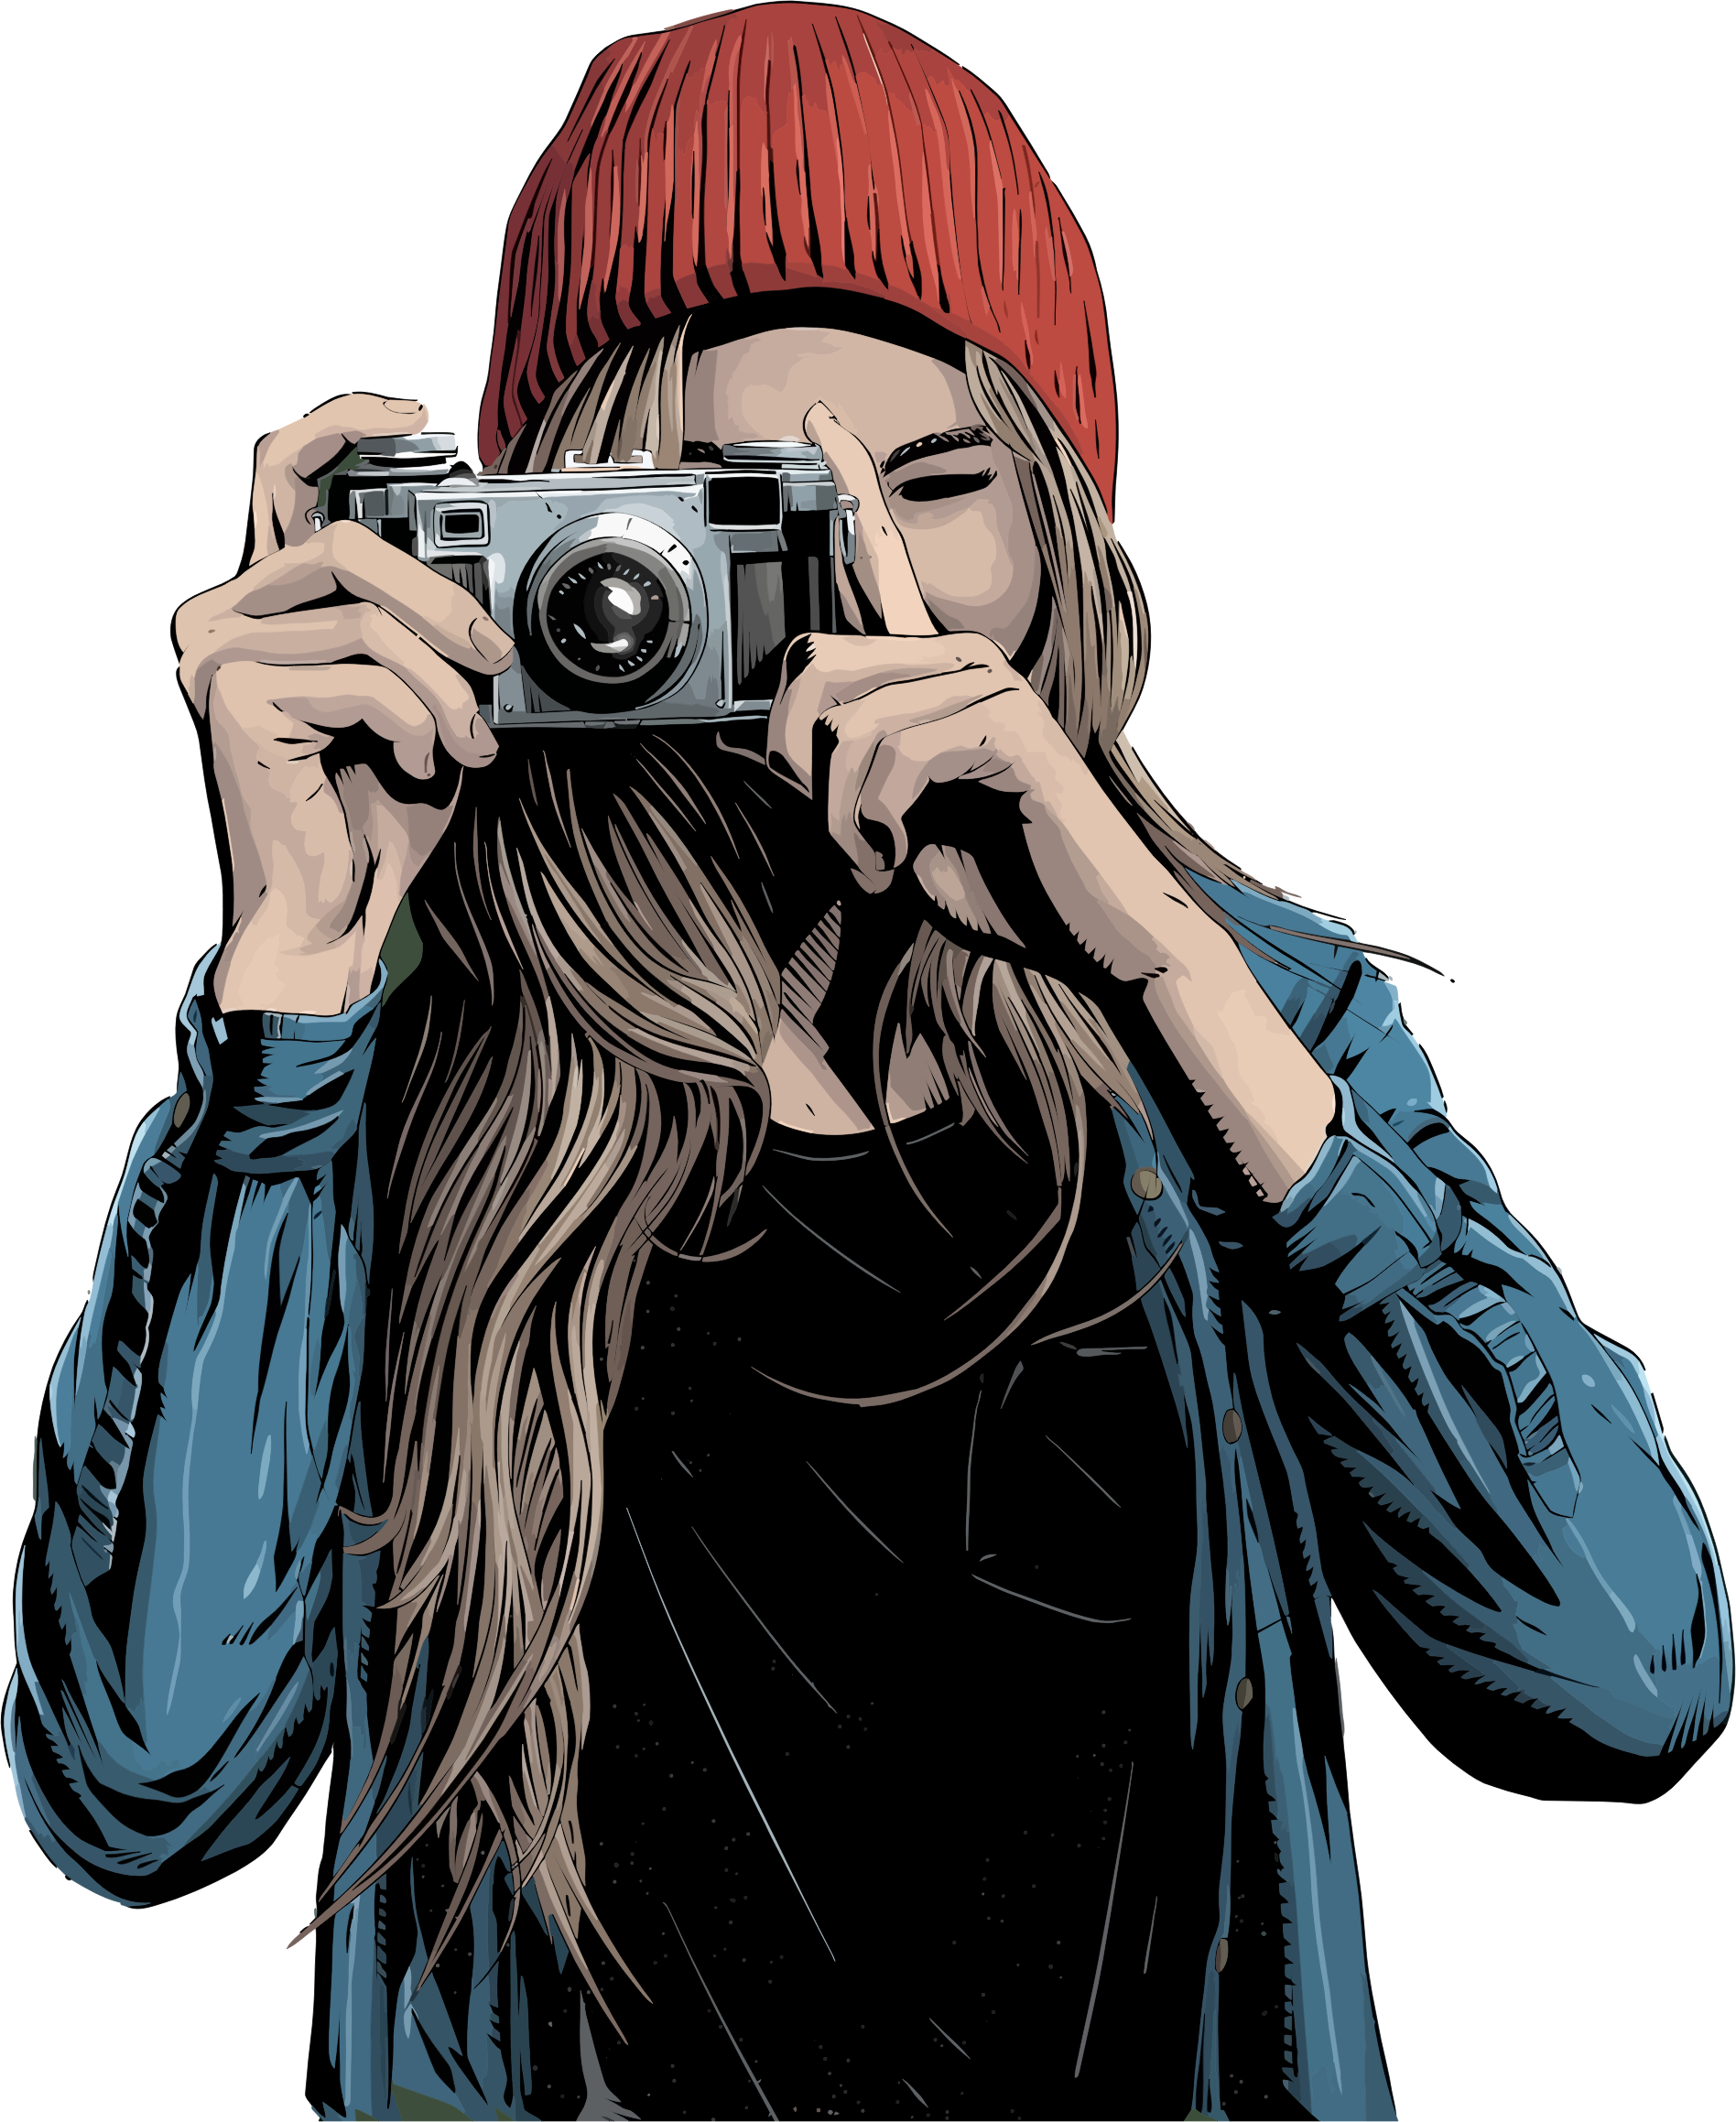 Photograph clipart female photographer. Woman taking picture big